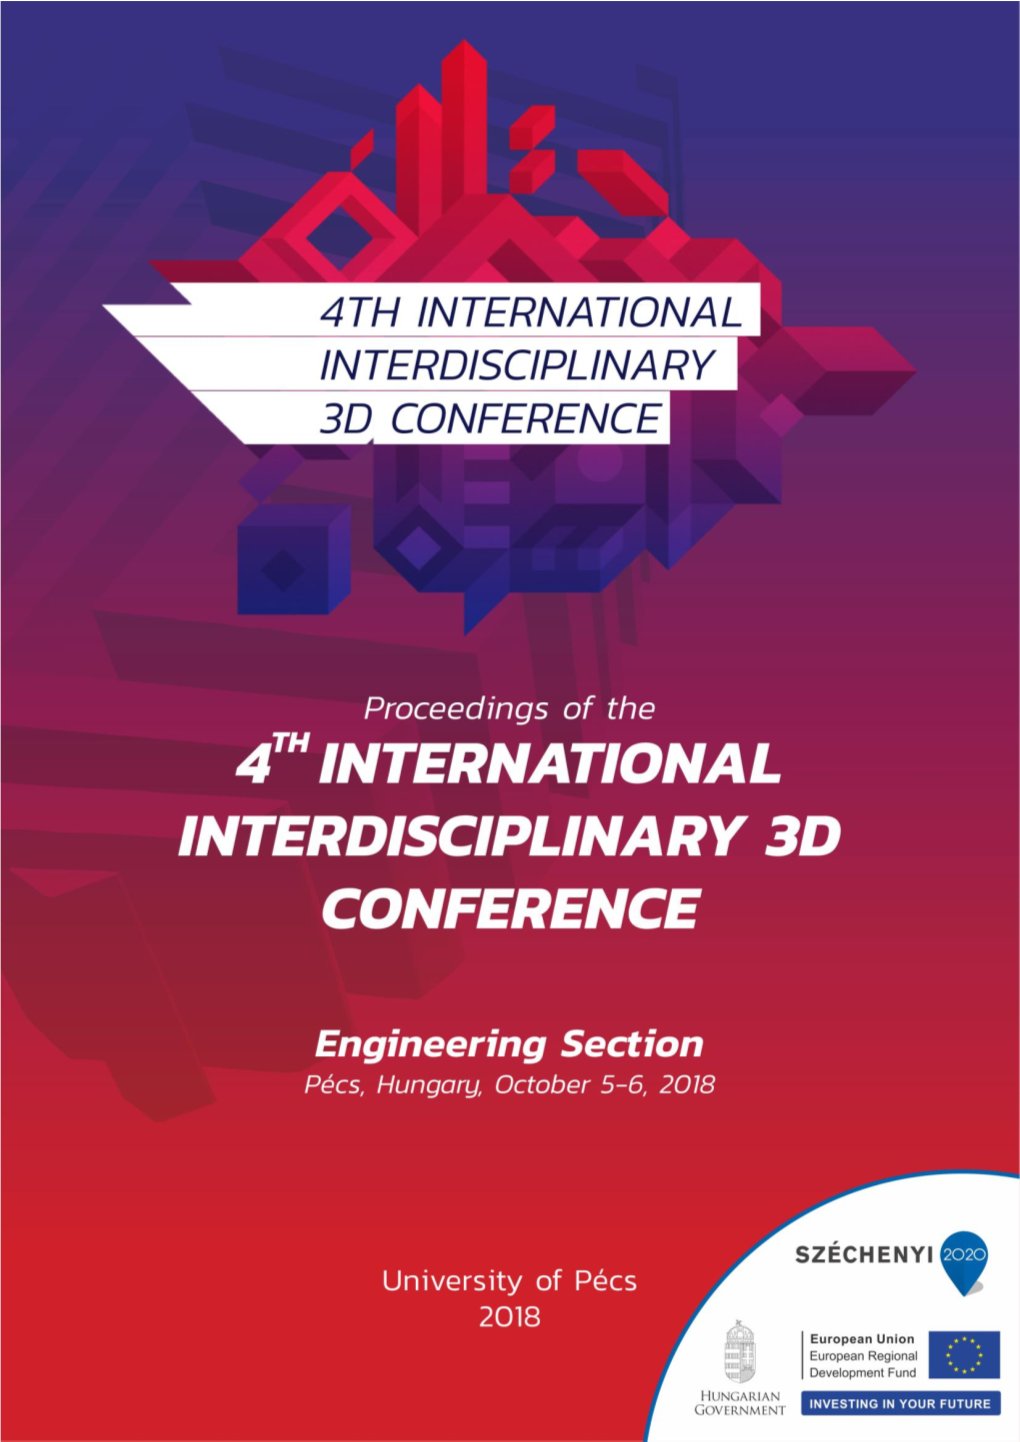 Proceedings of the 4Th International Interdisciplinary 3D Conference Engineering Section Pécs, Hungary, October 5-6, 2018